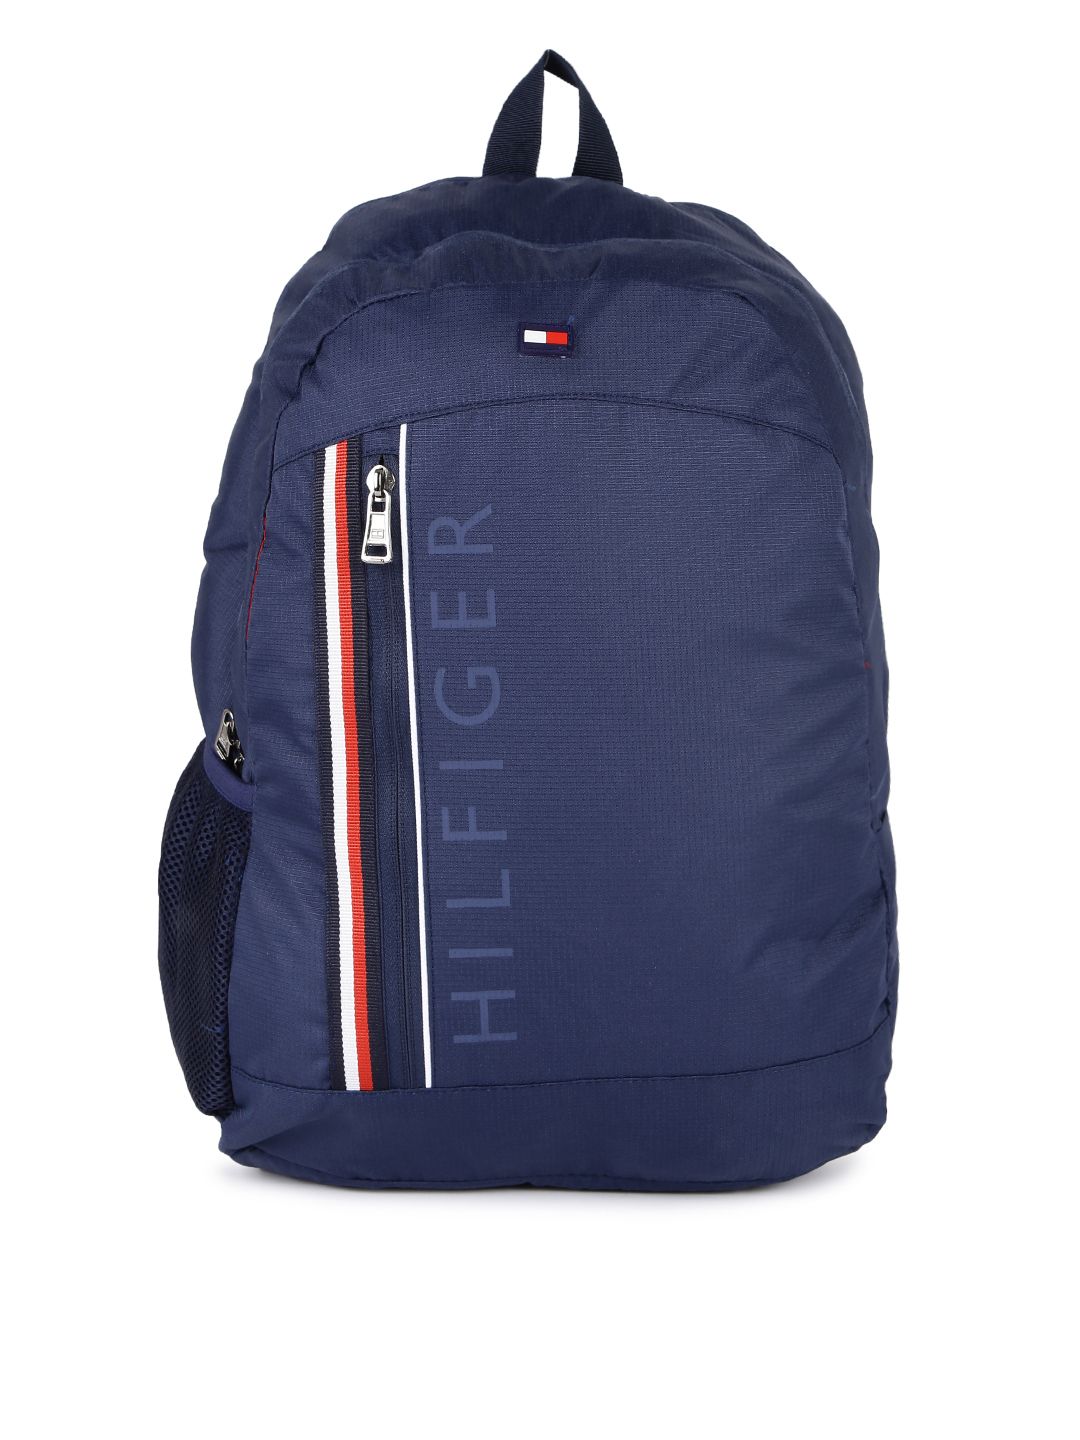 Tommy Hilfiger Unisex Navy Laptop Backpack Price in India